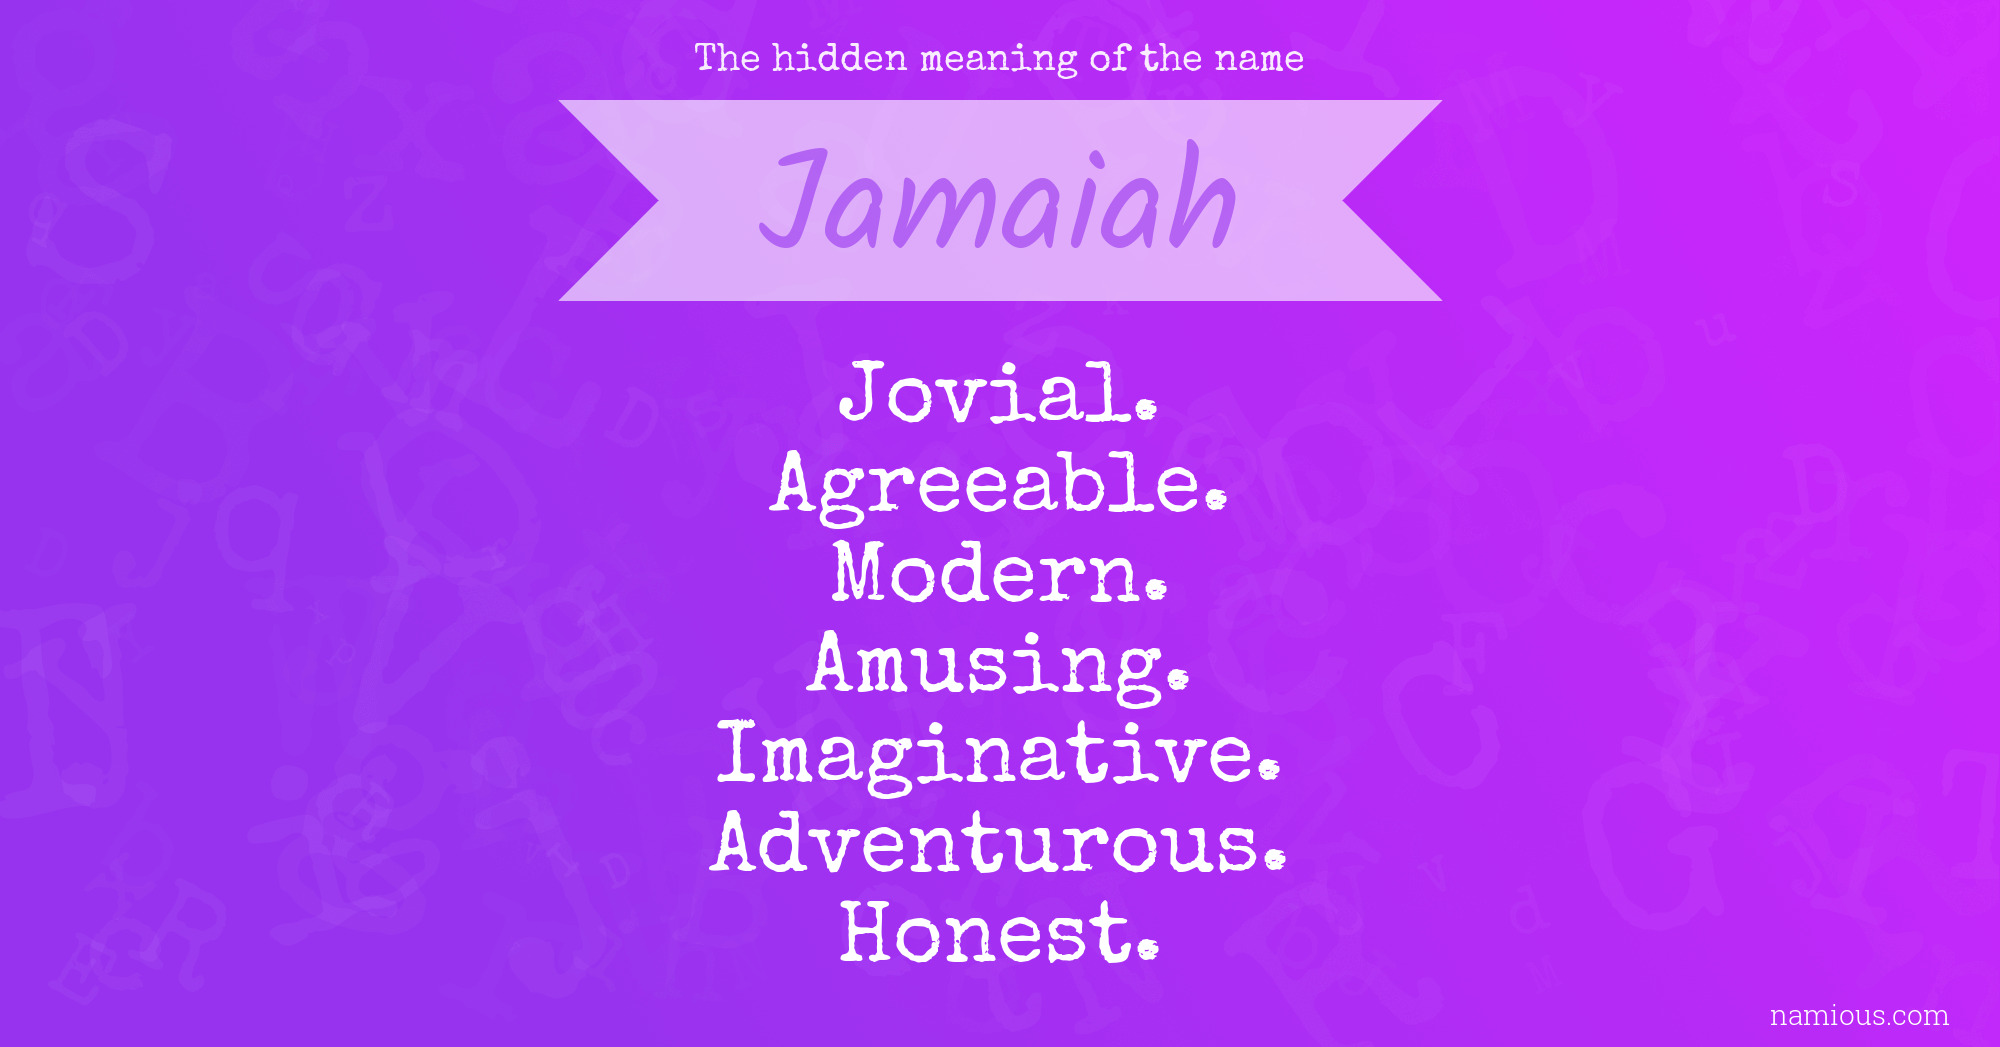 The hidden meaning of the name Jamaiah